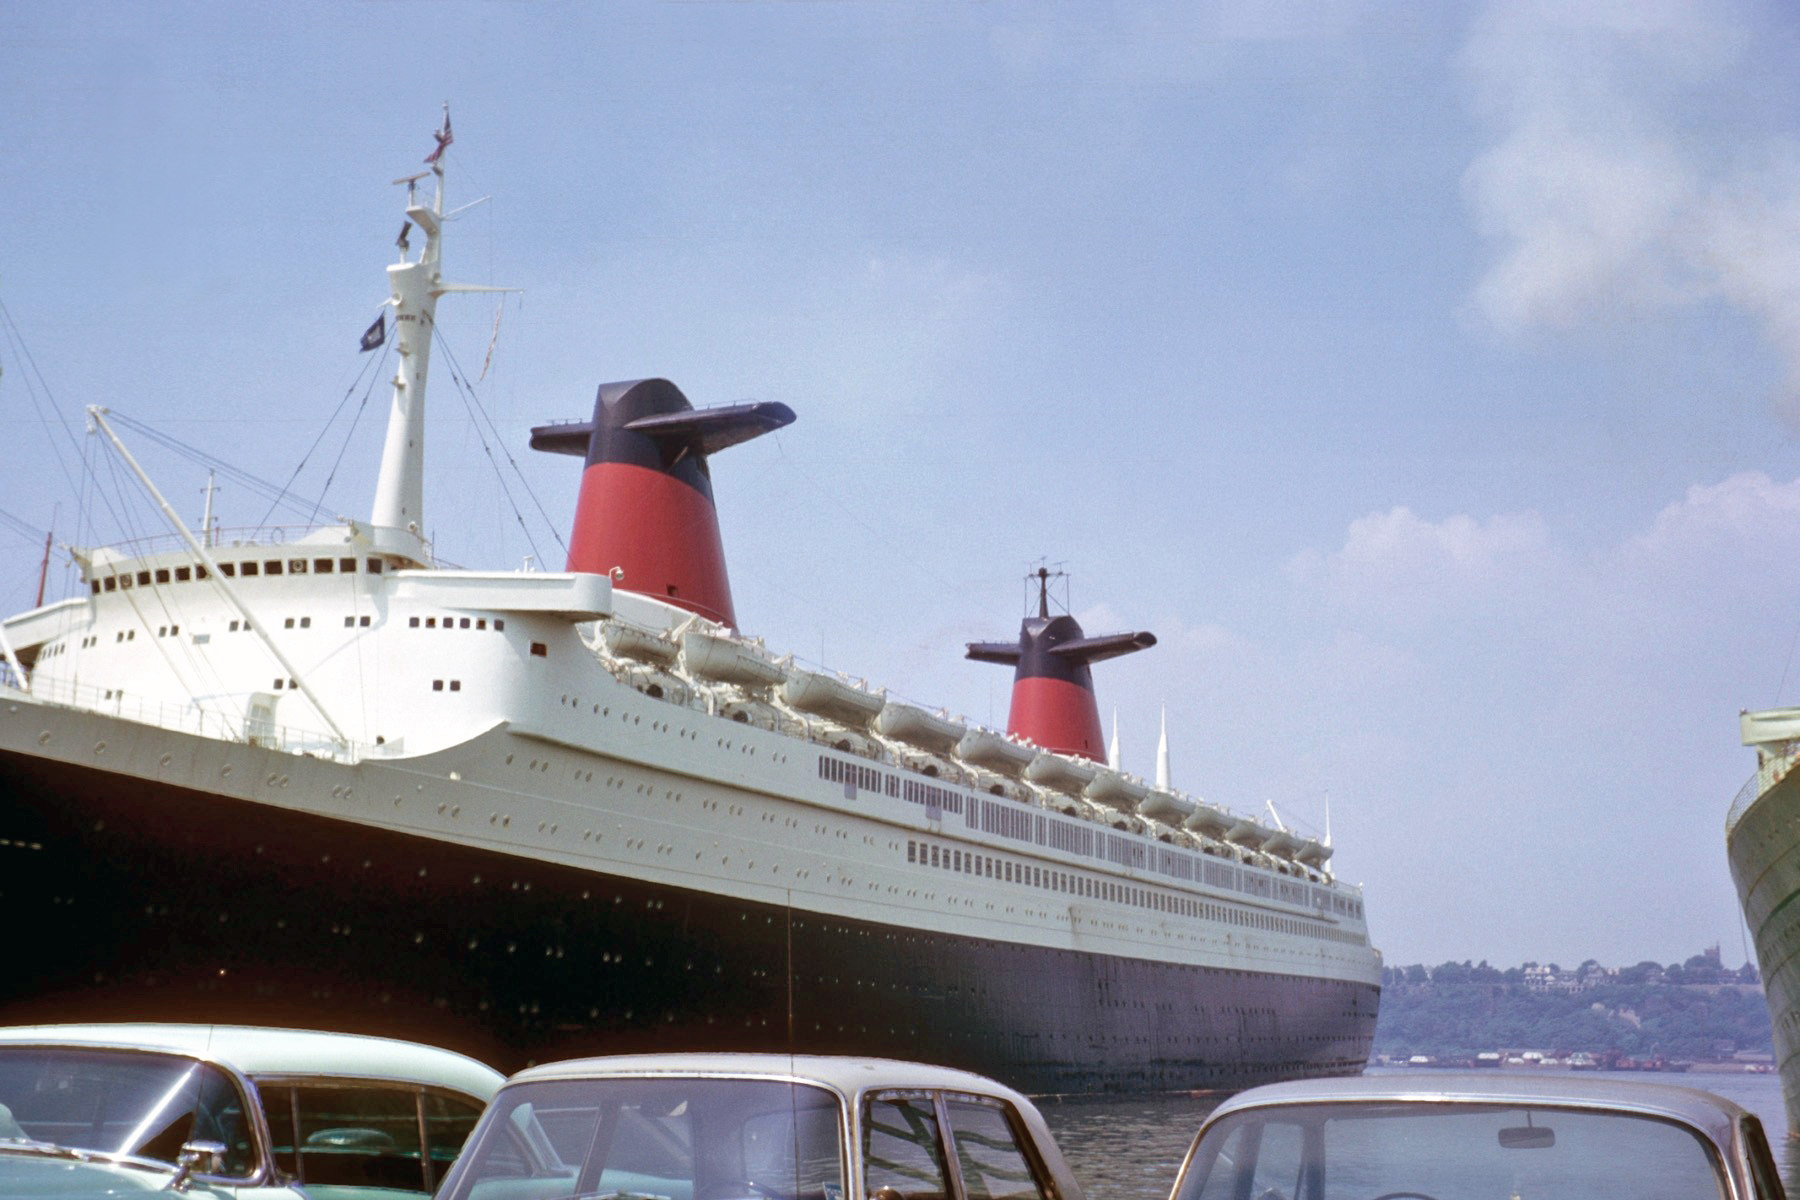 This is a picture of the SS France (French Line) my father took prior to our family boarding the ship at Pier 88, New York for a European trip in the summer of 1963. We were on our way to visit family in both England and France. They don’t build them like that anymore, that includes the cars in the foreground. Gross Tonnage: 66,343; Length: 1,035 ft; Beam: 110.6 ft. View full size.